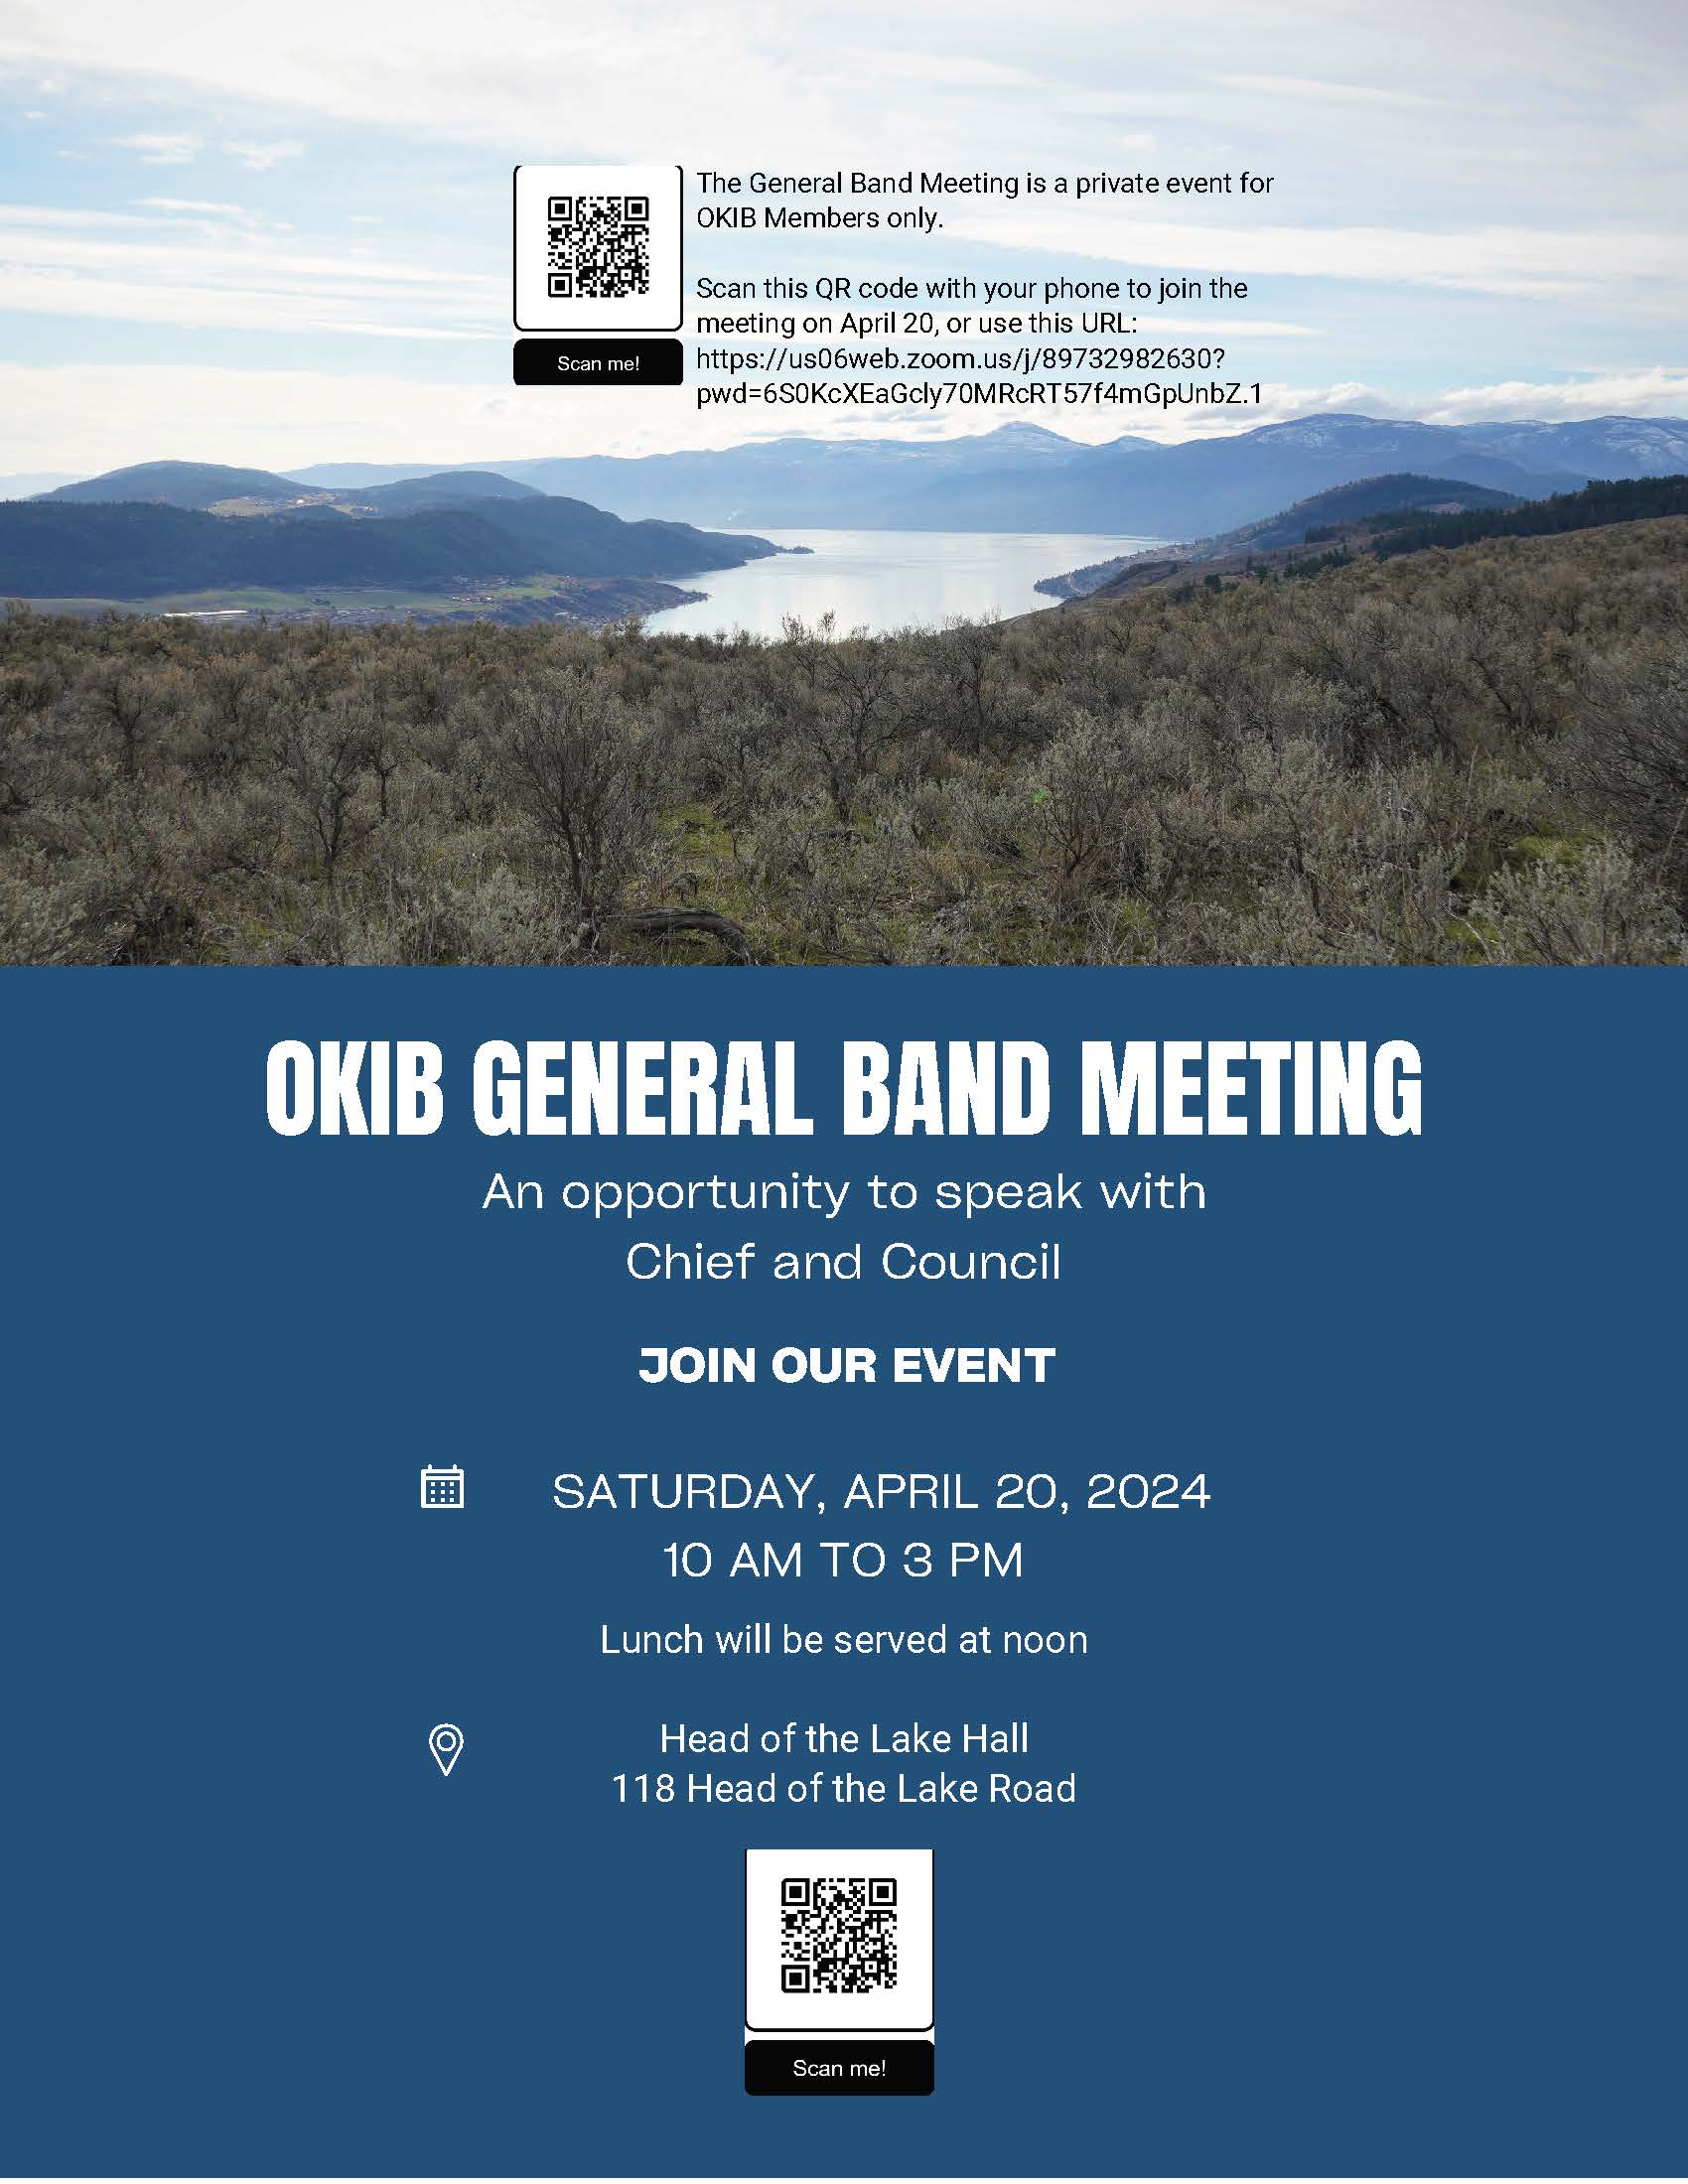 Reminder: General Band Meeting happening tomorrow, April 20th, 10am-3pm @ Head of the Lake Hall.